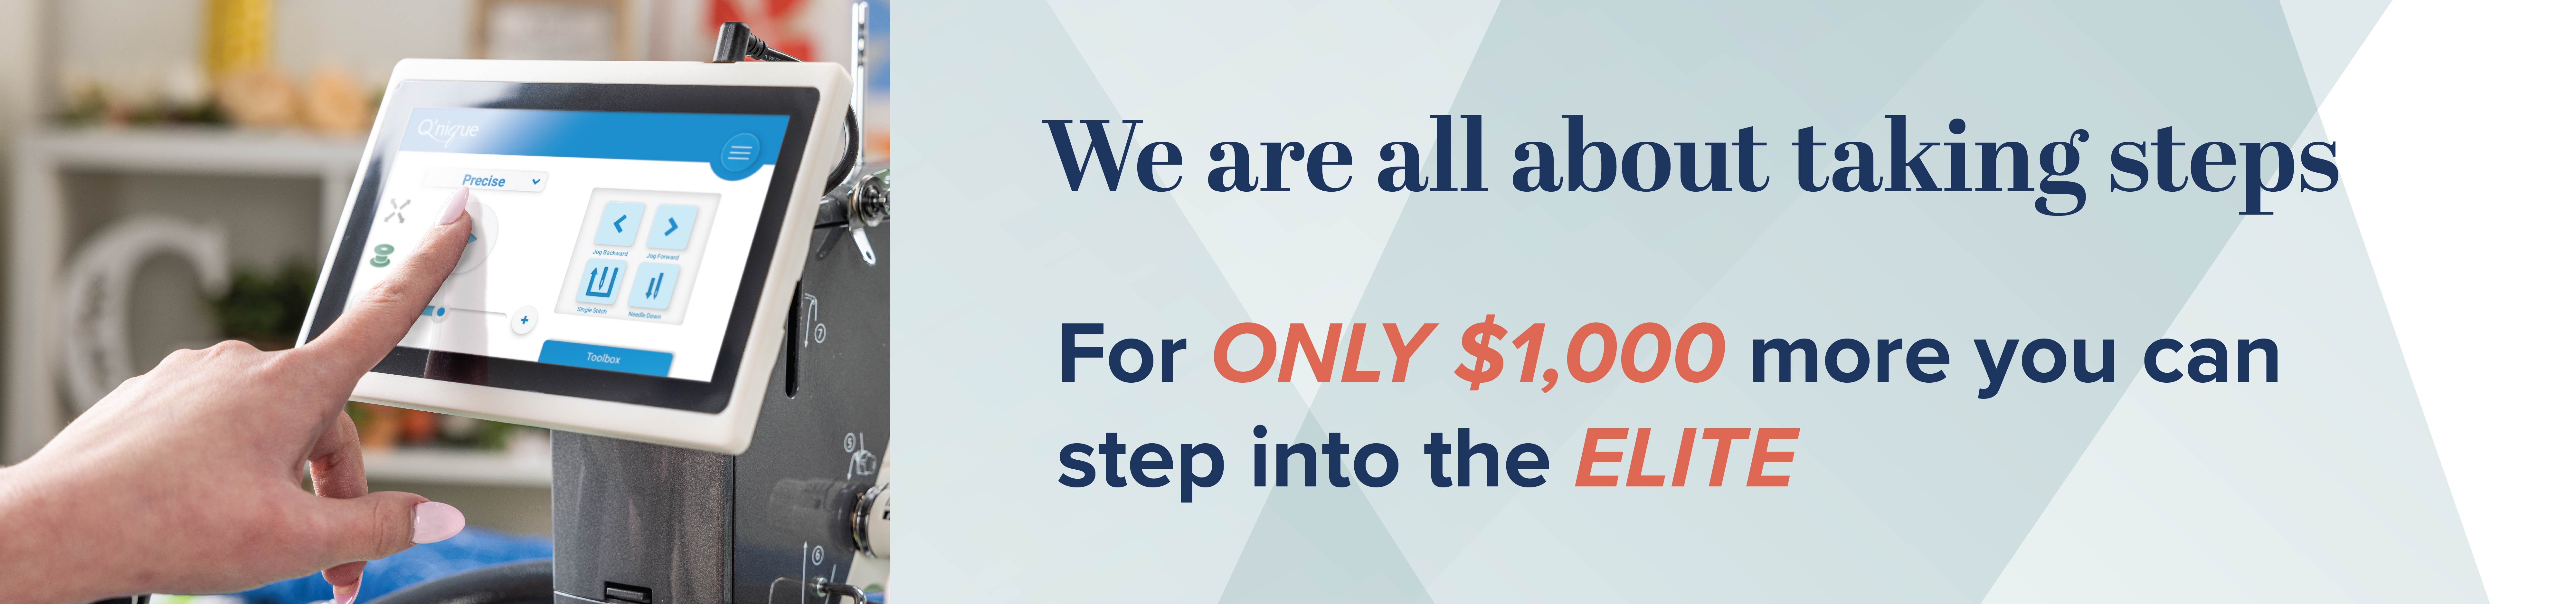 We are all about taking steps. For ONLY $1000 more you can step into the elite